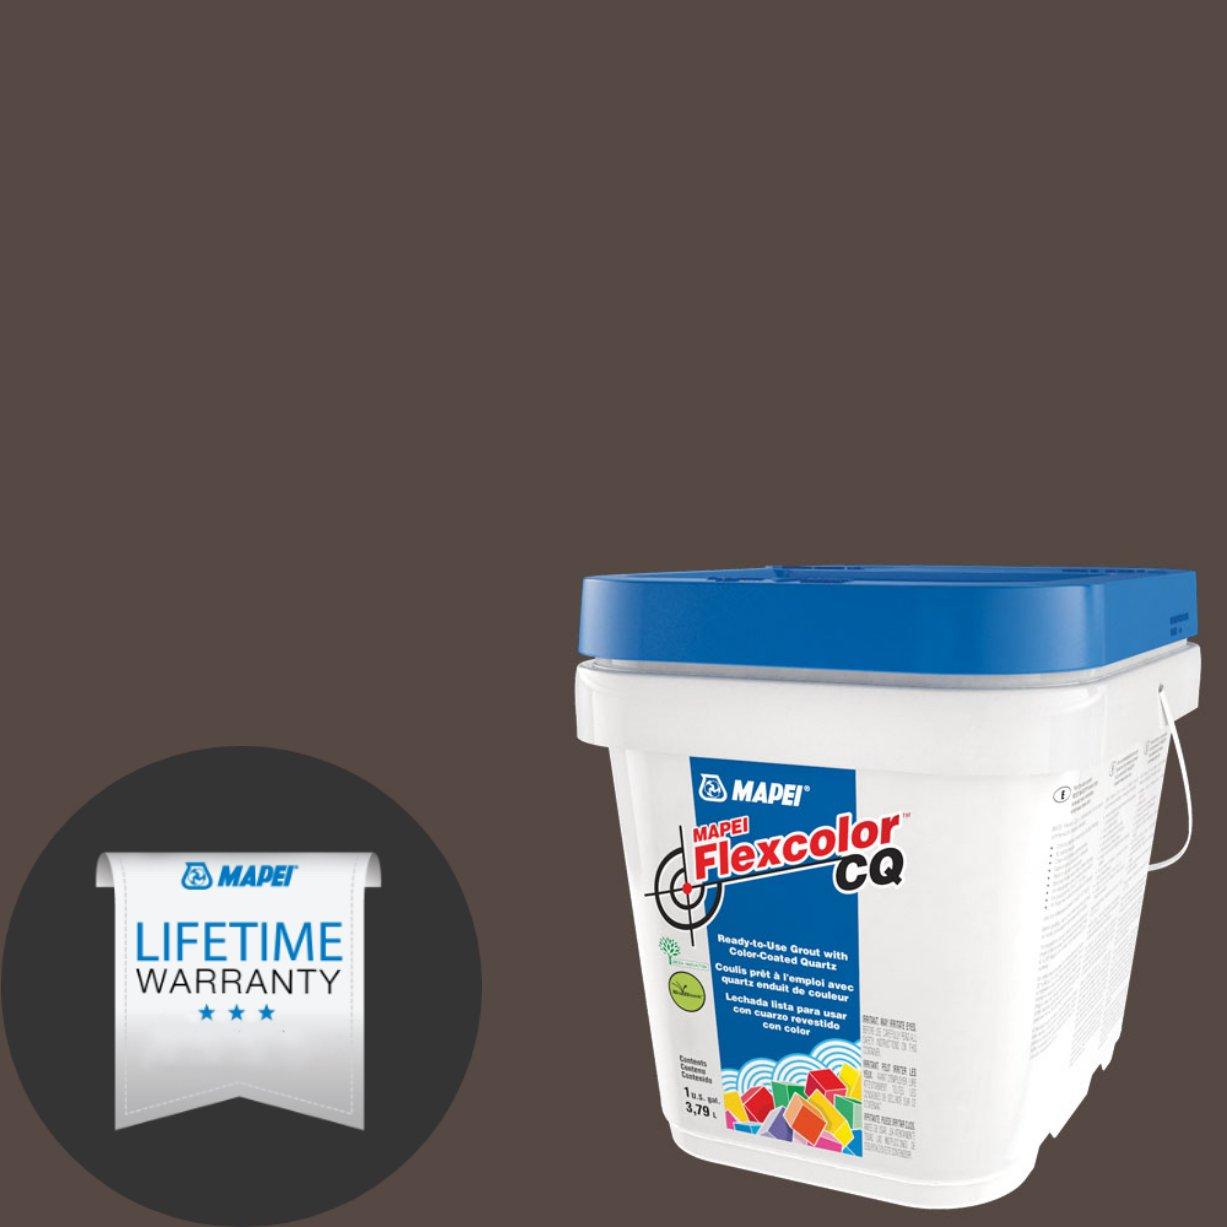 Mapei 115 Truffle Flexcolor Cq Grout 1gal 100242429 Floor And Decor